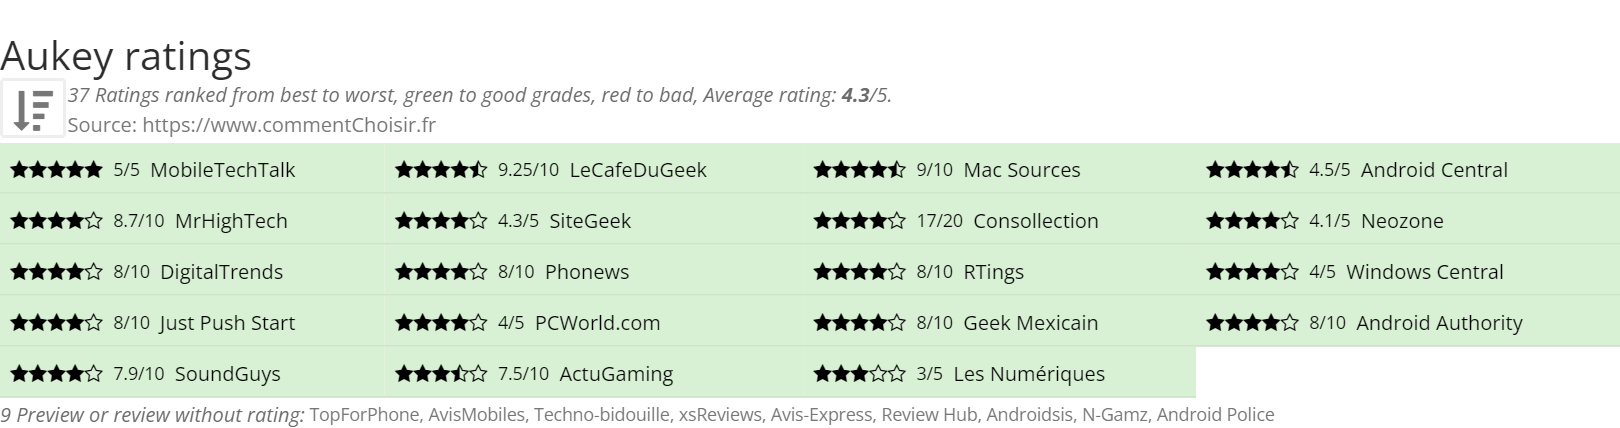 Ratings Aukey